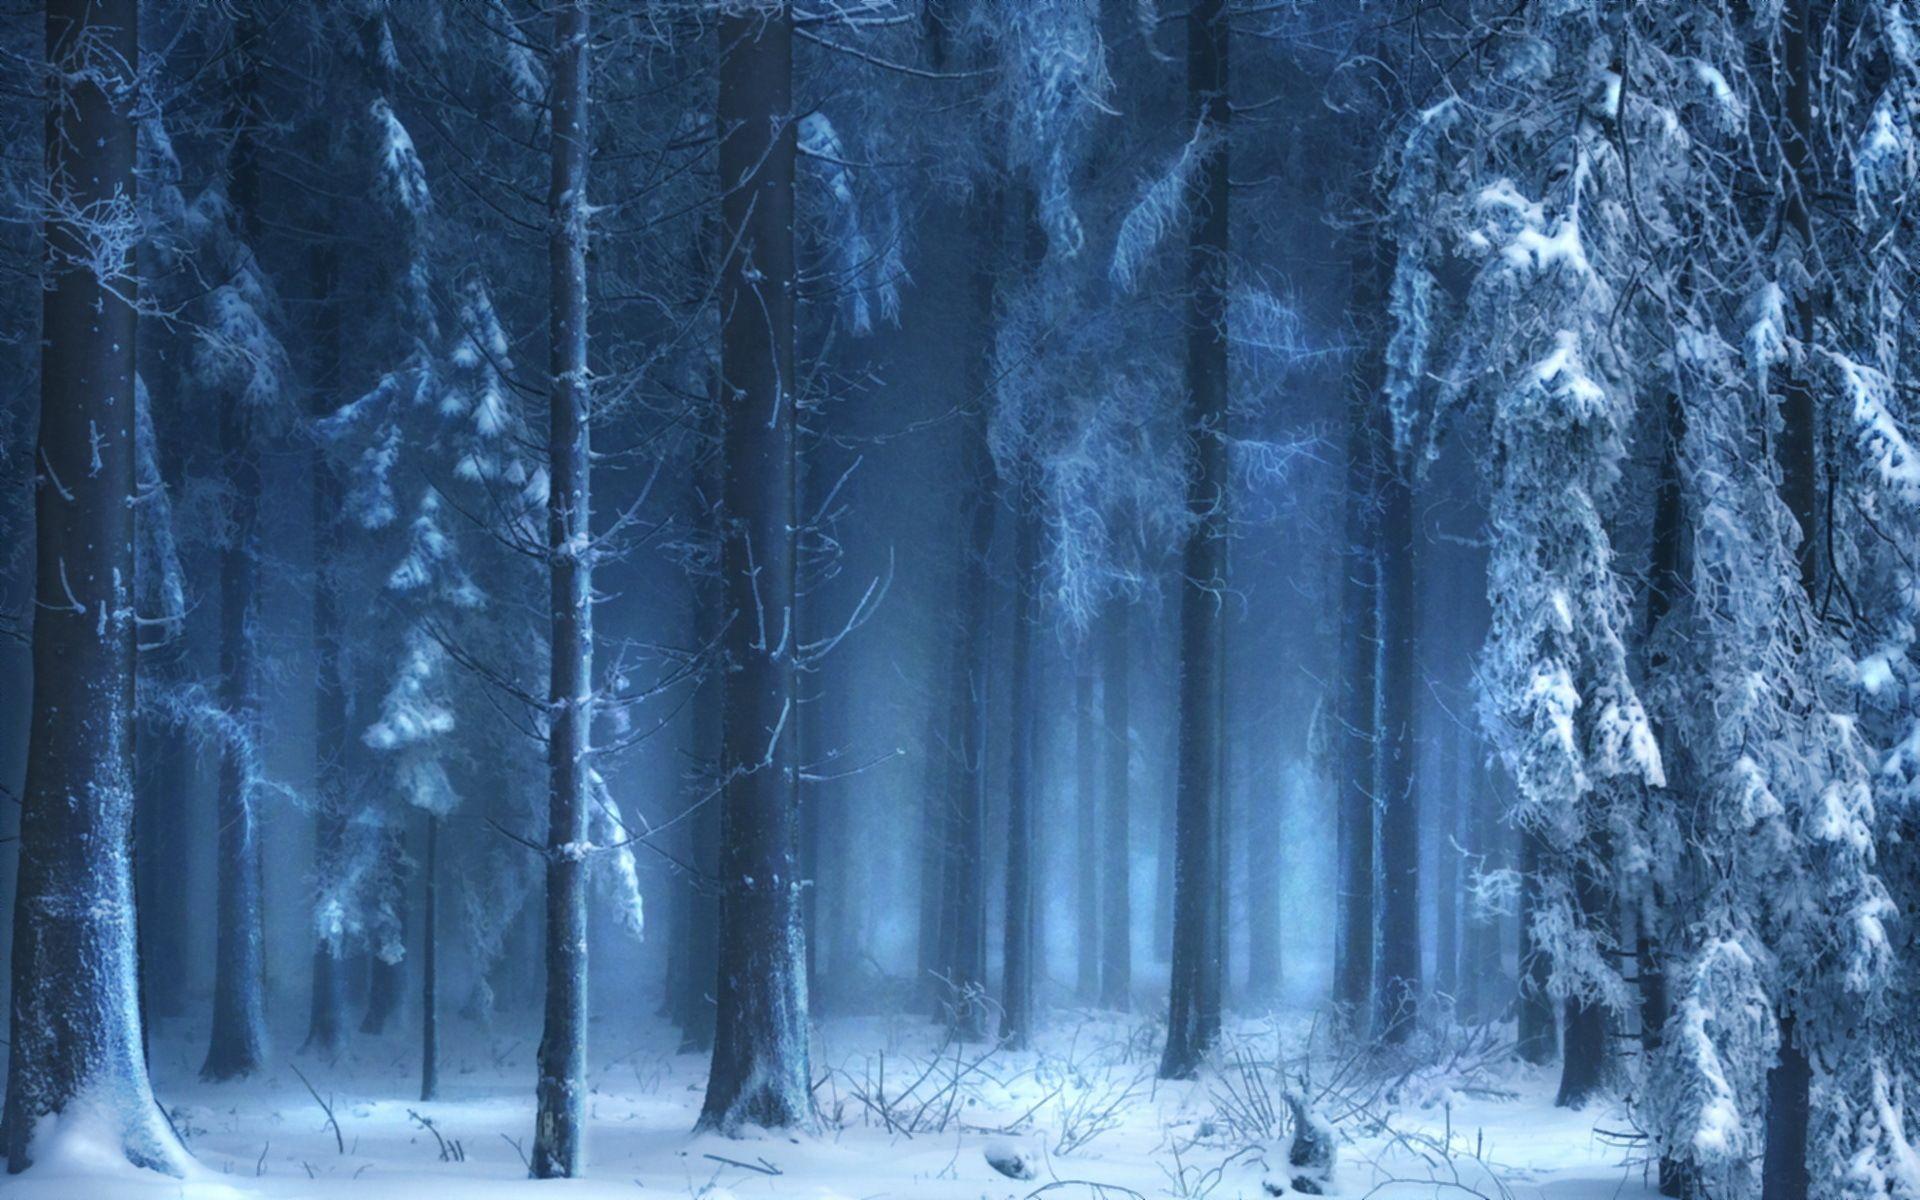 Landscapes trees forest woods winter snow wallpaperx1200. Winter snow wallpaper, Winter wallpaper, Frozen wallpaper